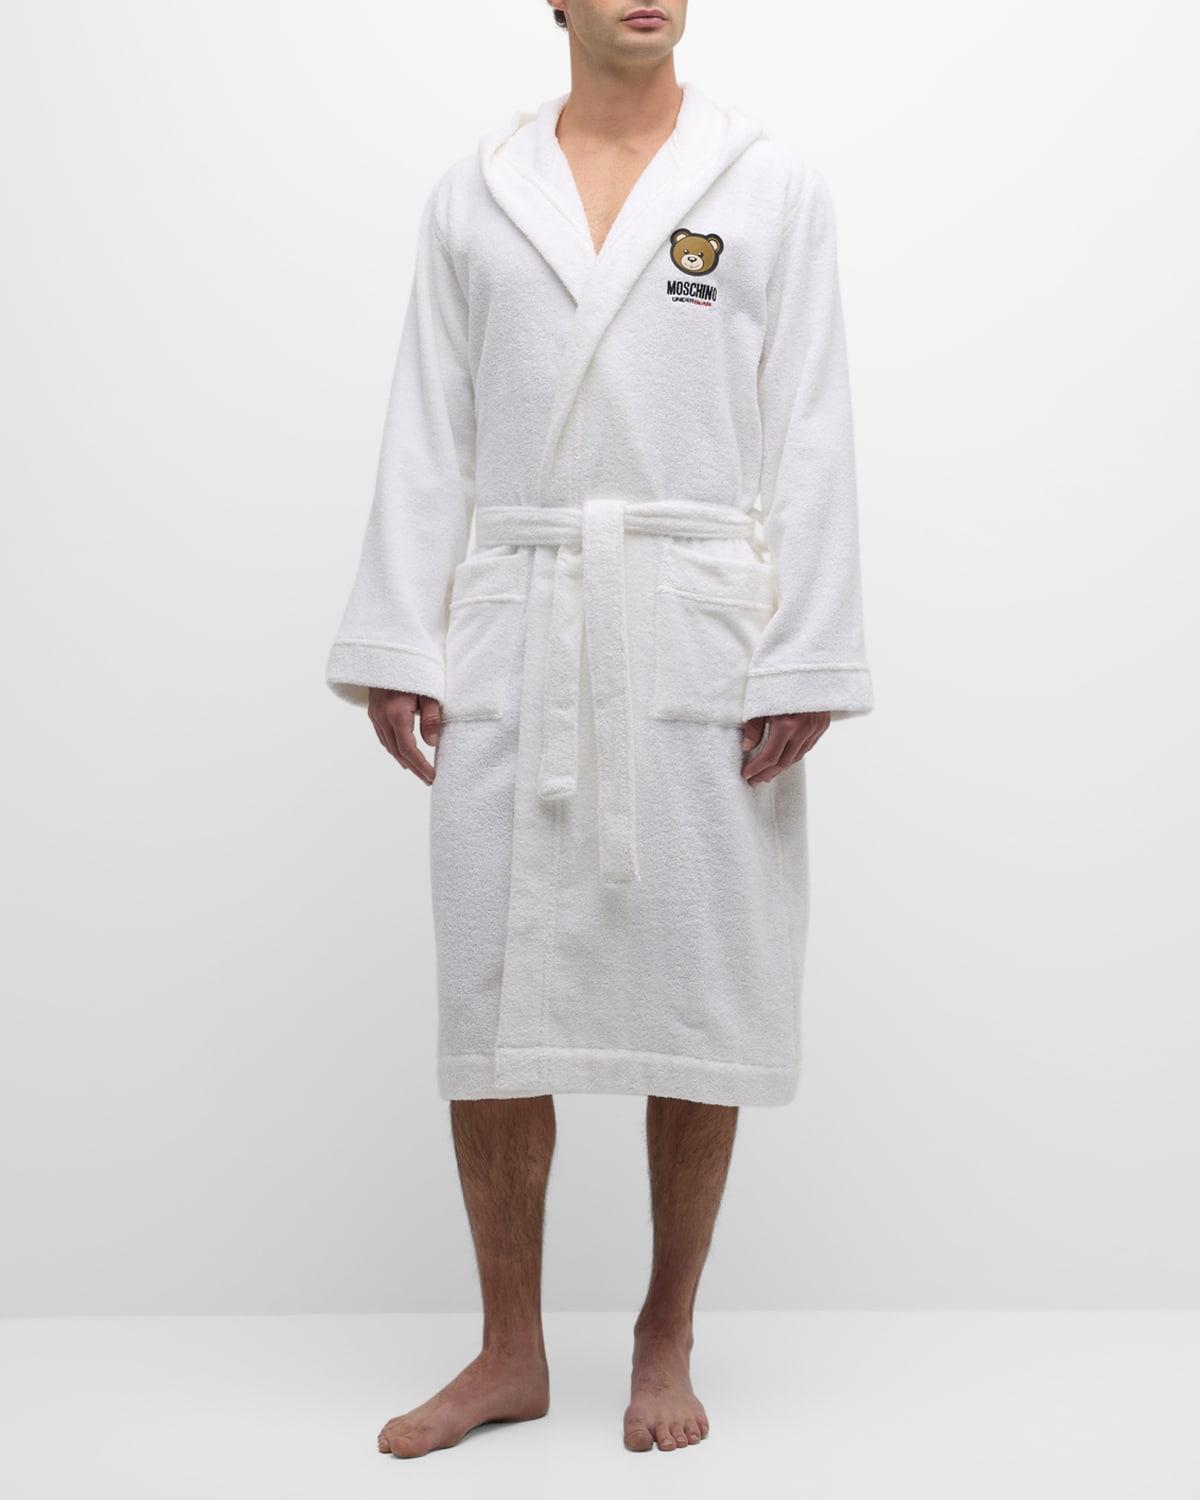 Moschino Men's Underbear Toweling Dressing Gown In White